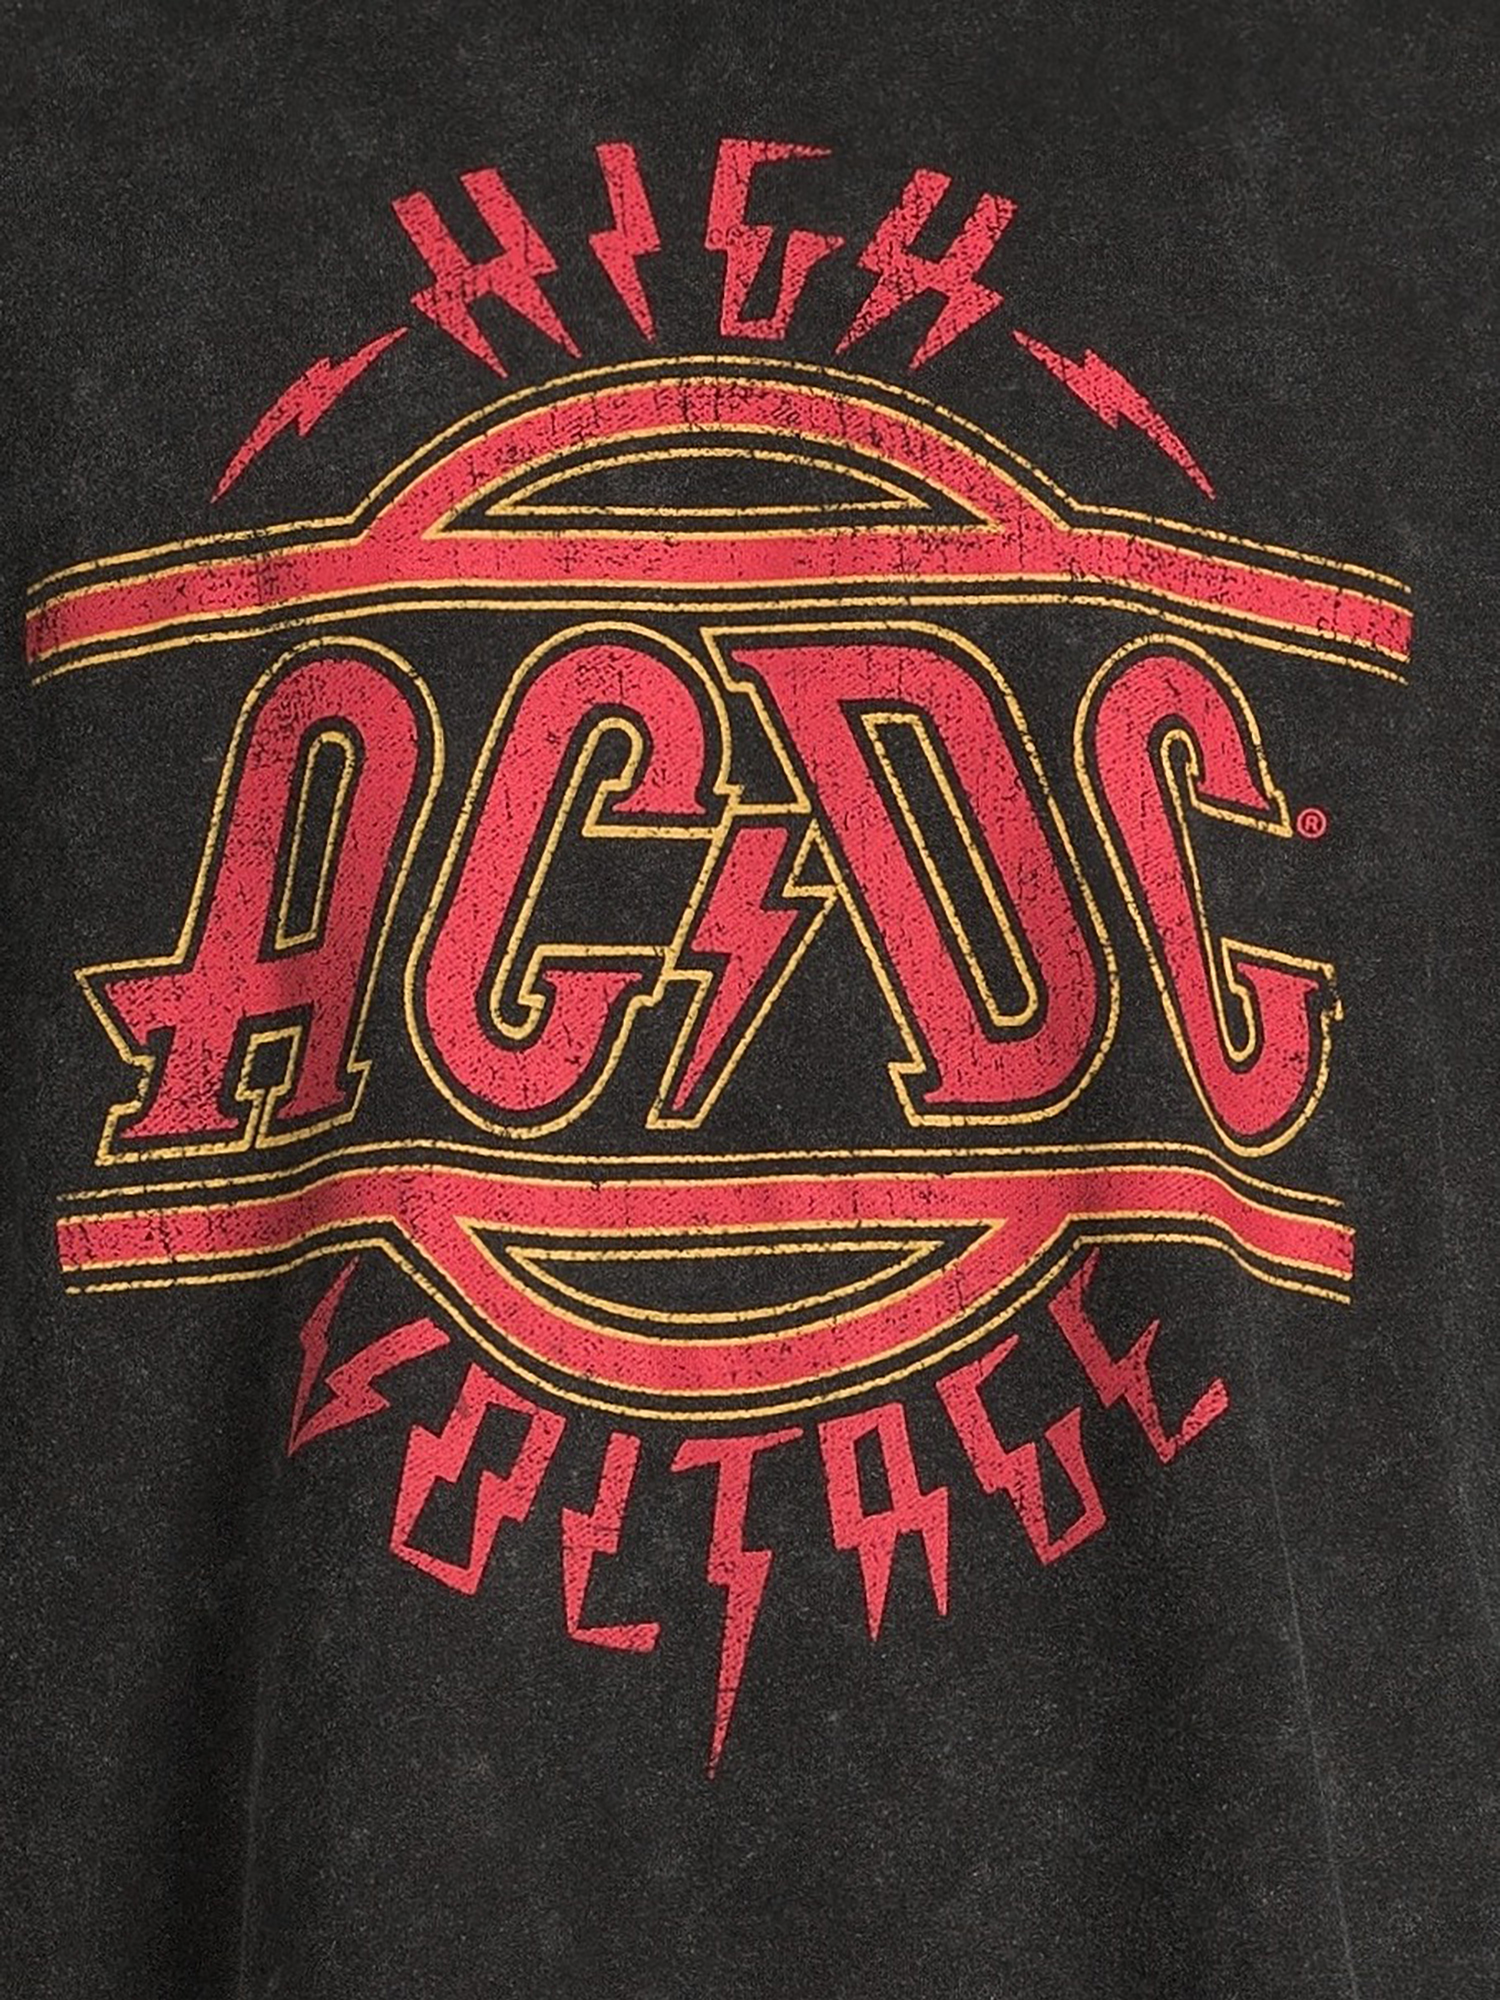 ACDC Men’s and Big Men’s Oversized Graphic Band Tee, Sizes XS-3XL - image 4 of 5